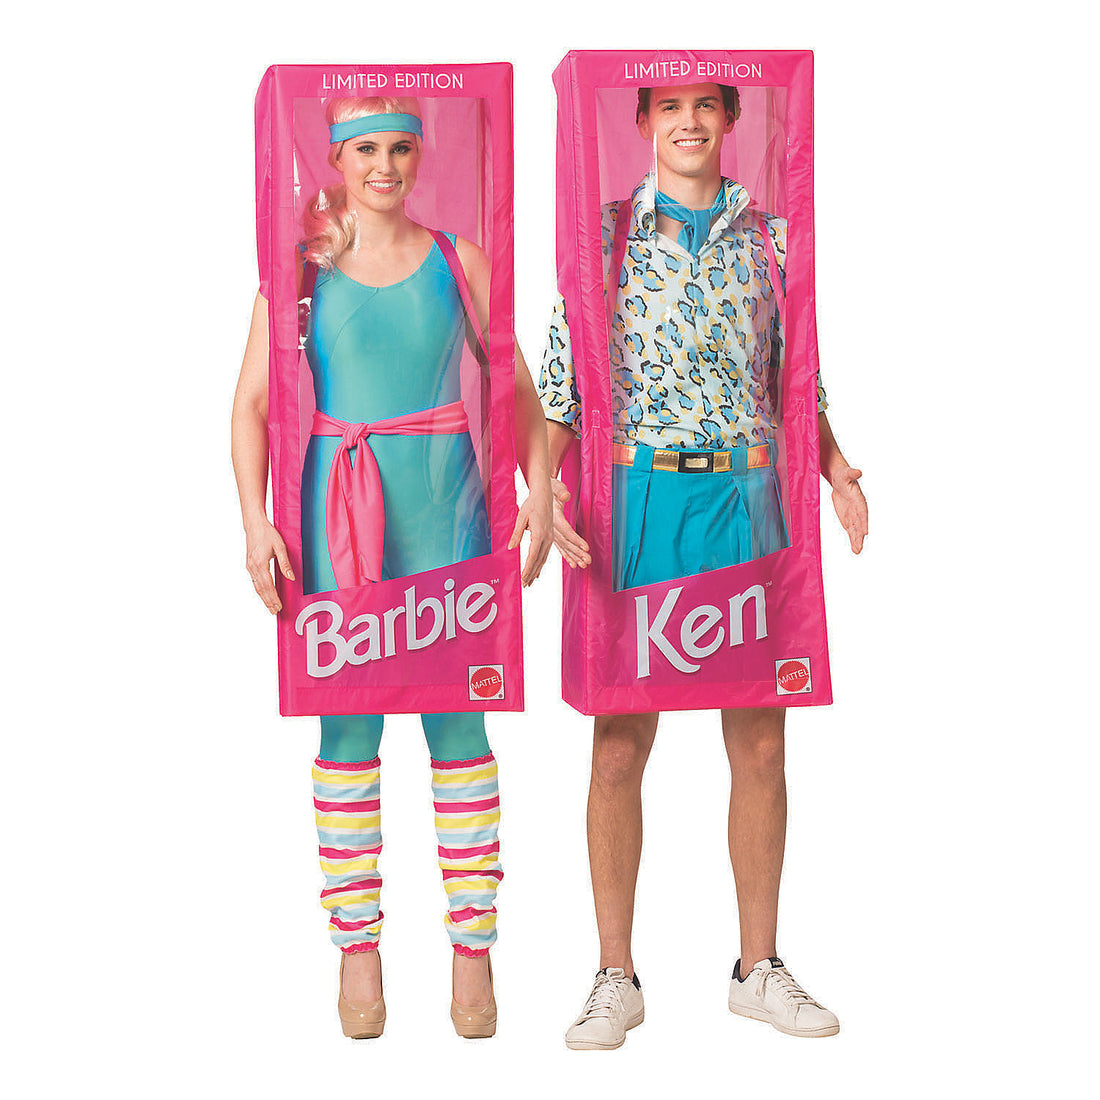 The 48 Best Couples Costume Ideas for Halloween 2022